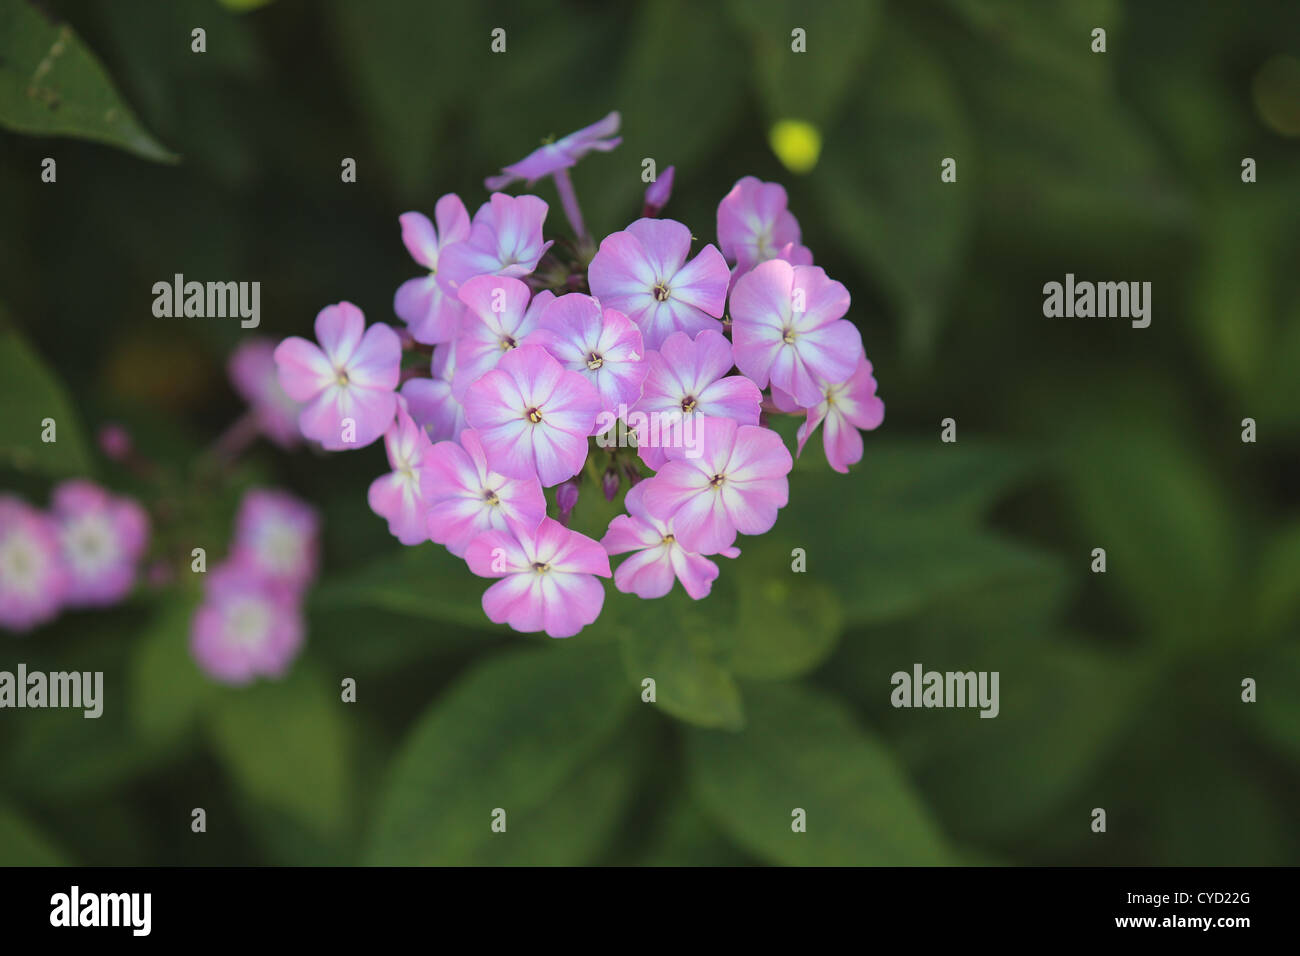 Pink phlox in focus, blurred background Stock Photo